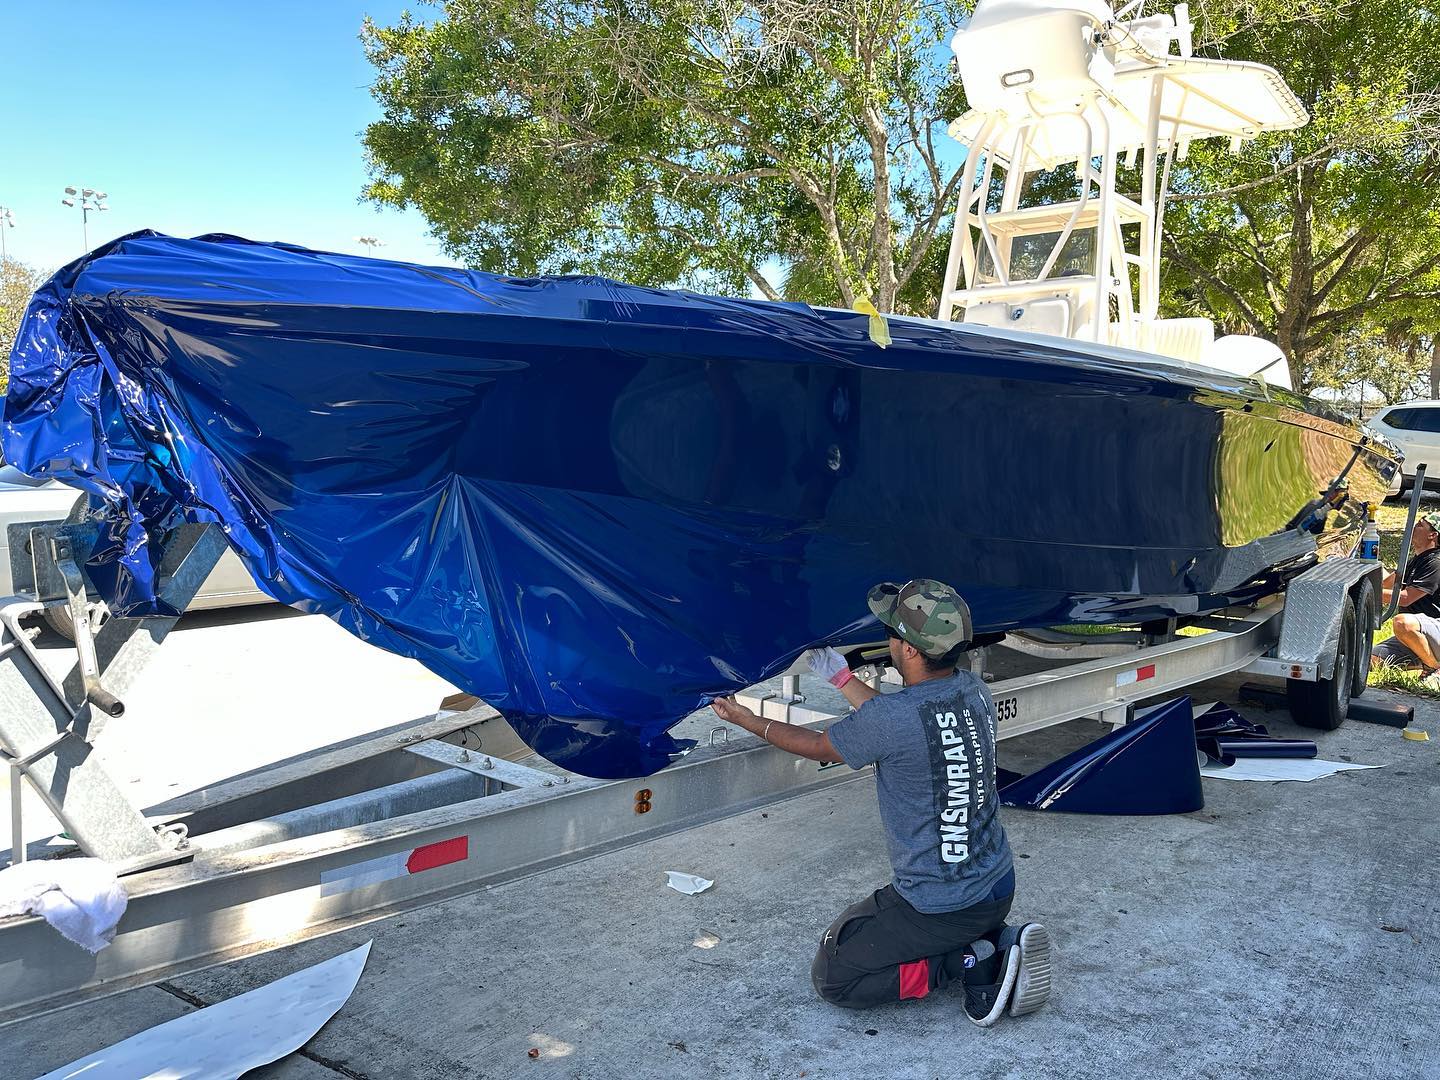 Boat Wraps 101: Choosing the Right Design for Your Watercraft